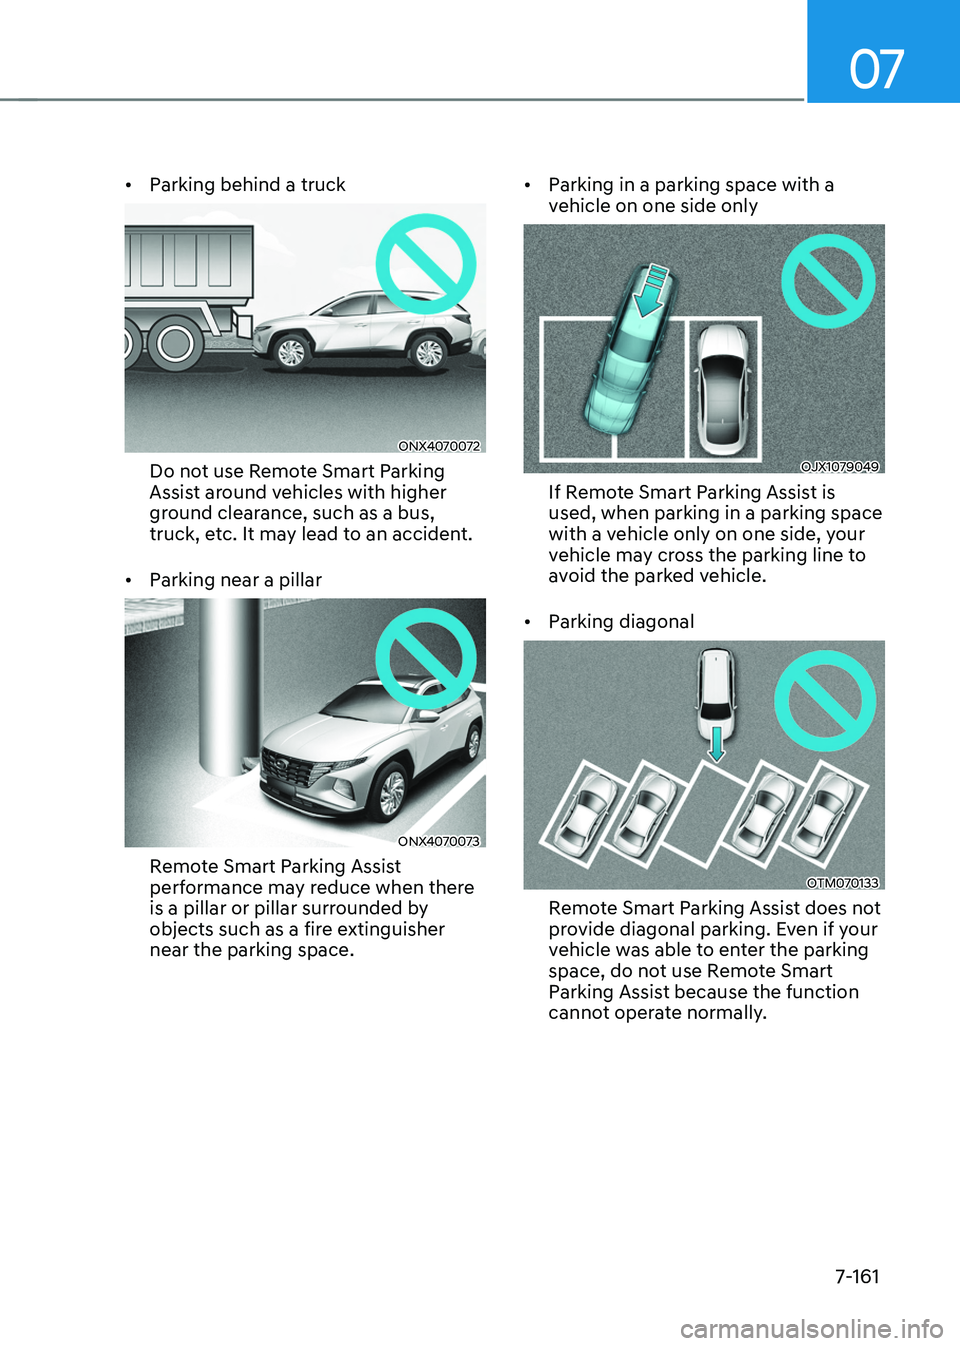 HYUNDAI TUCSON 2022  Owners Manual 07
7-161
•	Parking behind a truck
ONX4070072
Do not use Remote Smart Parking 
Assist around vehicles with higher 
ground clearance, such as a bus, 
truck, etc. It may lead to an accident. 
•	 Park